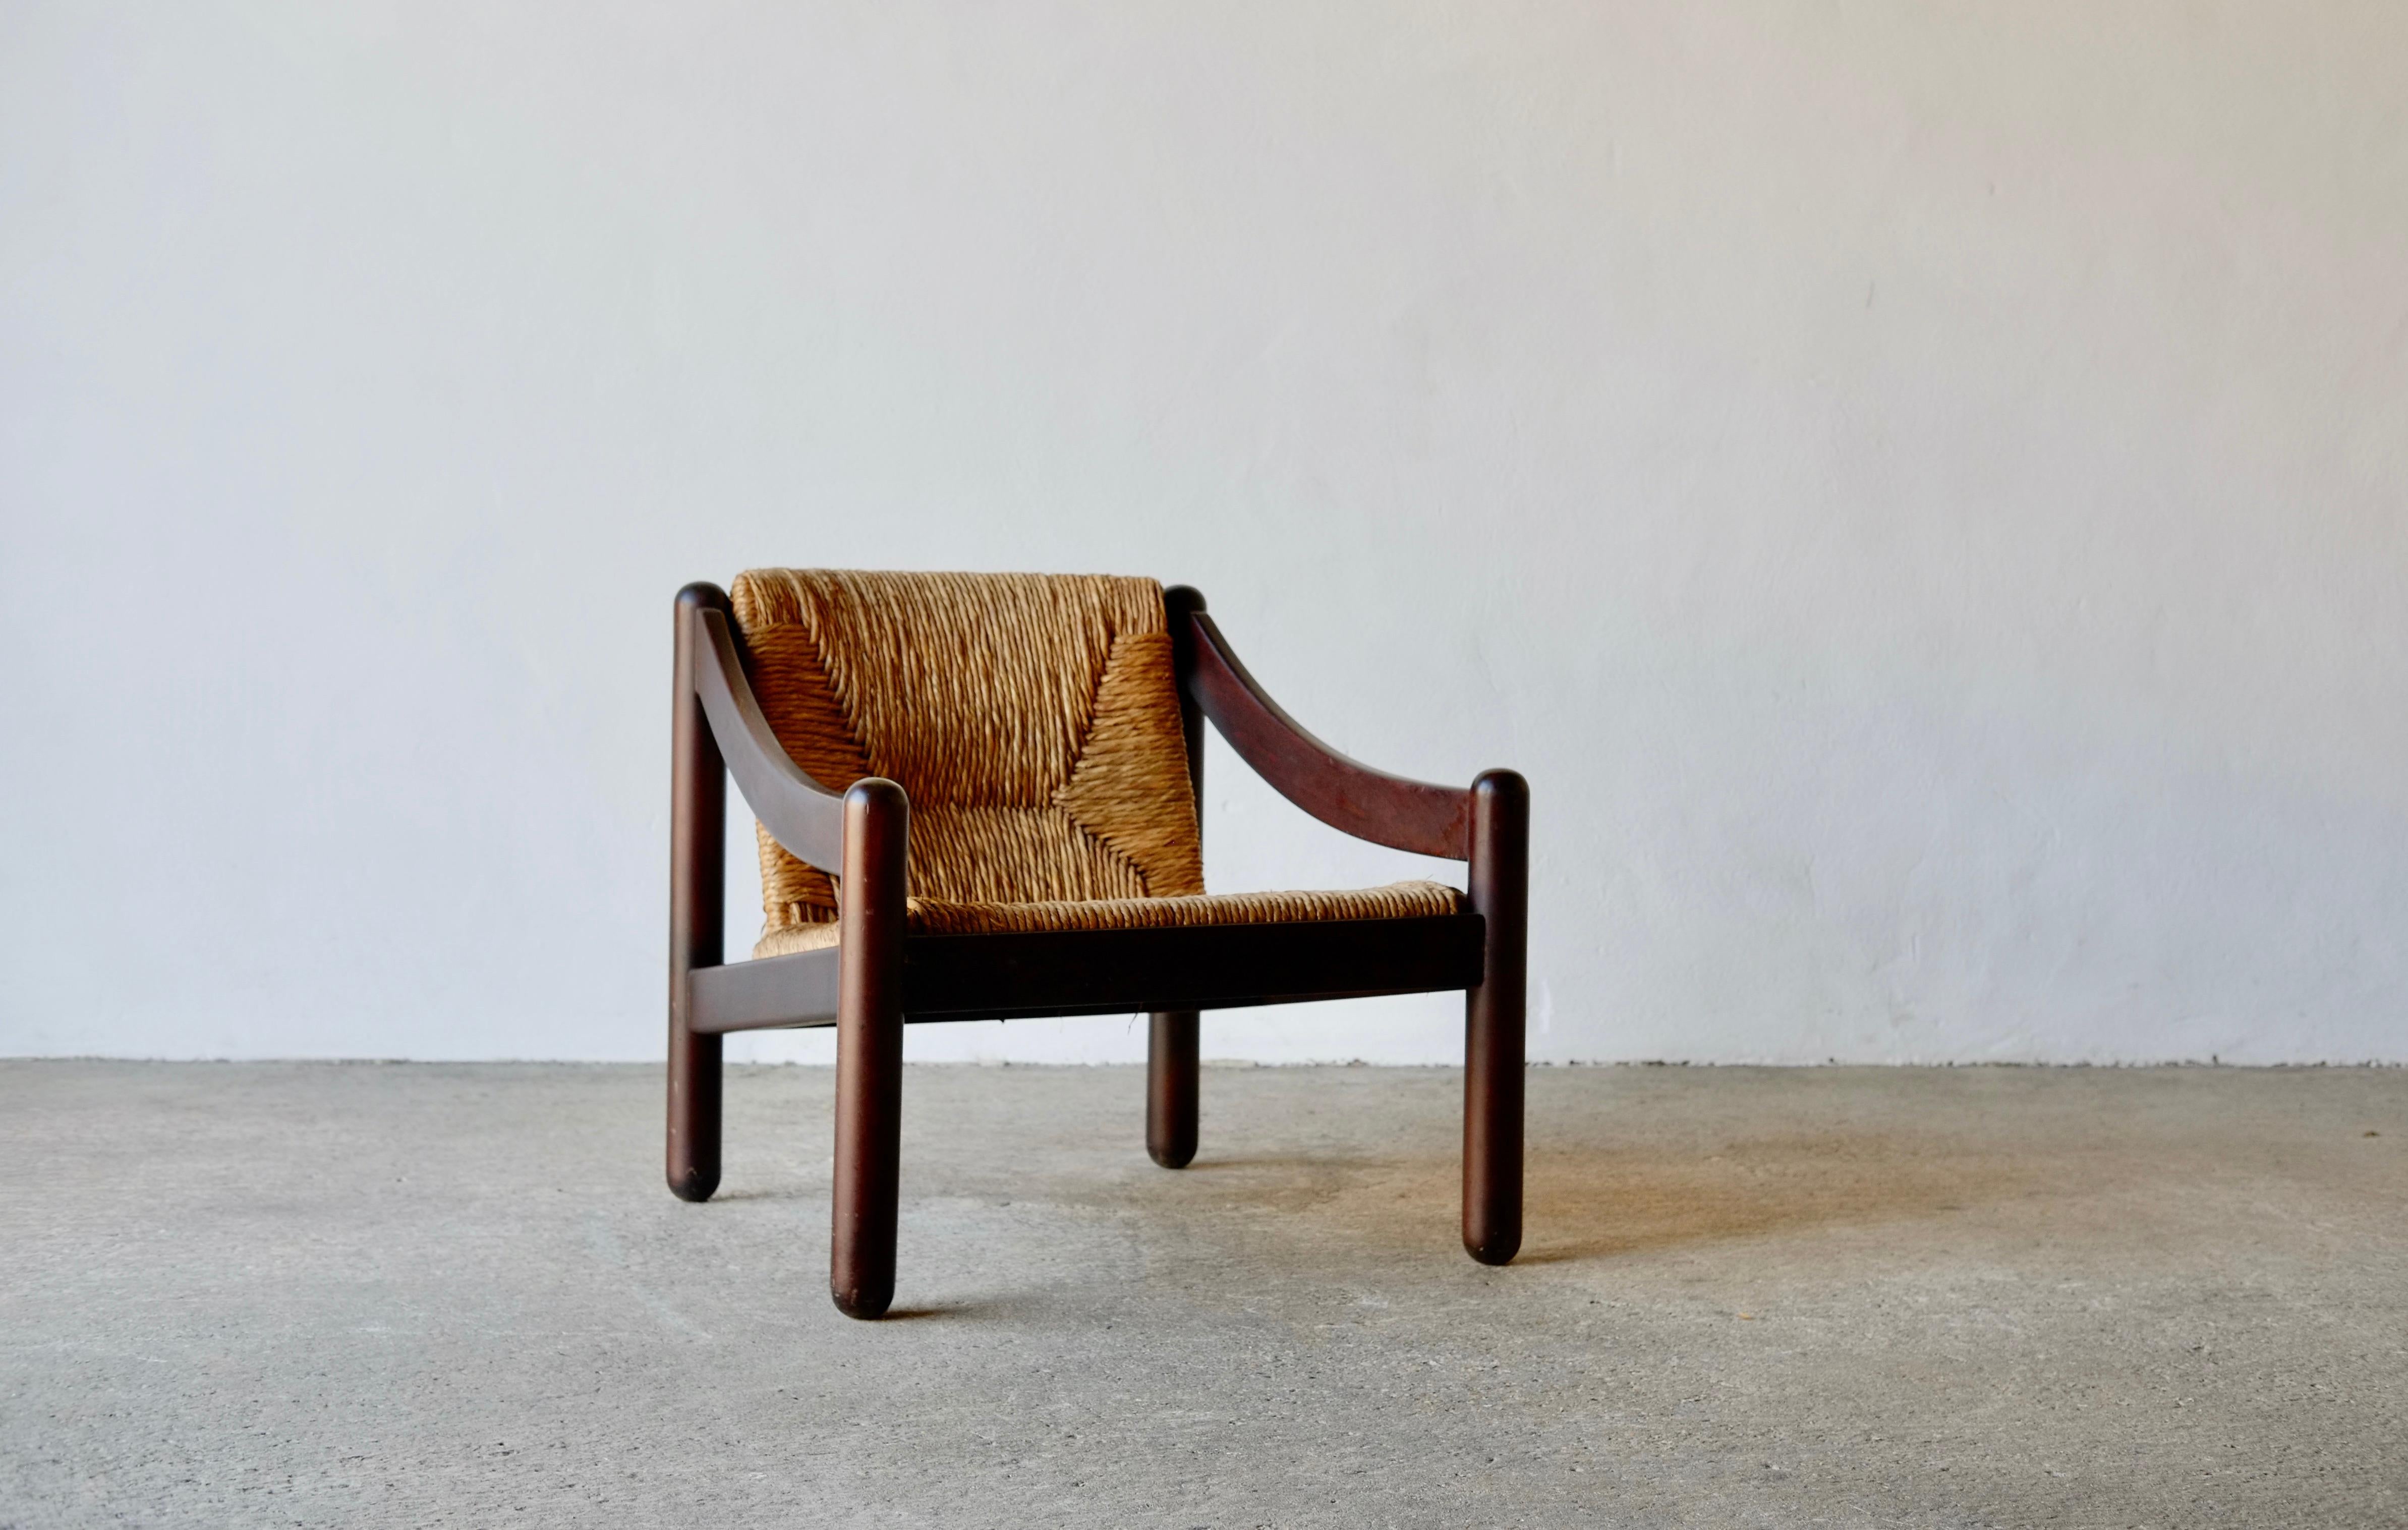 A model 930 armchair designed by Vico Magistretti as part of the Carimate range for Figli di Amedeo Cassina in 1966. The armchair is a particularly rare example of the Carimate range unlike the more common dining chairs.

Brown aniline lacquered